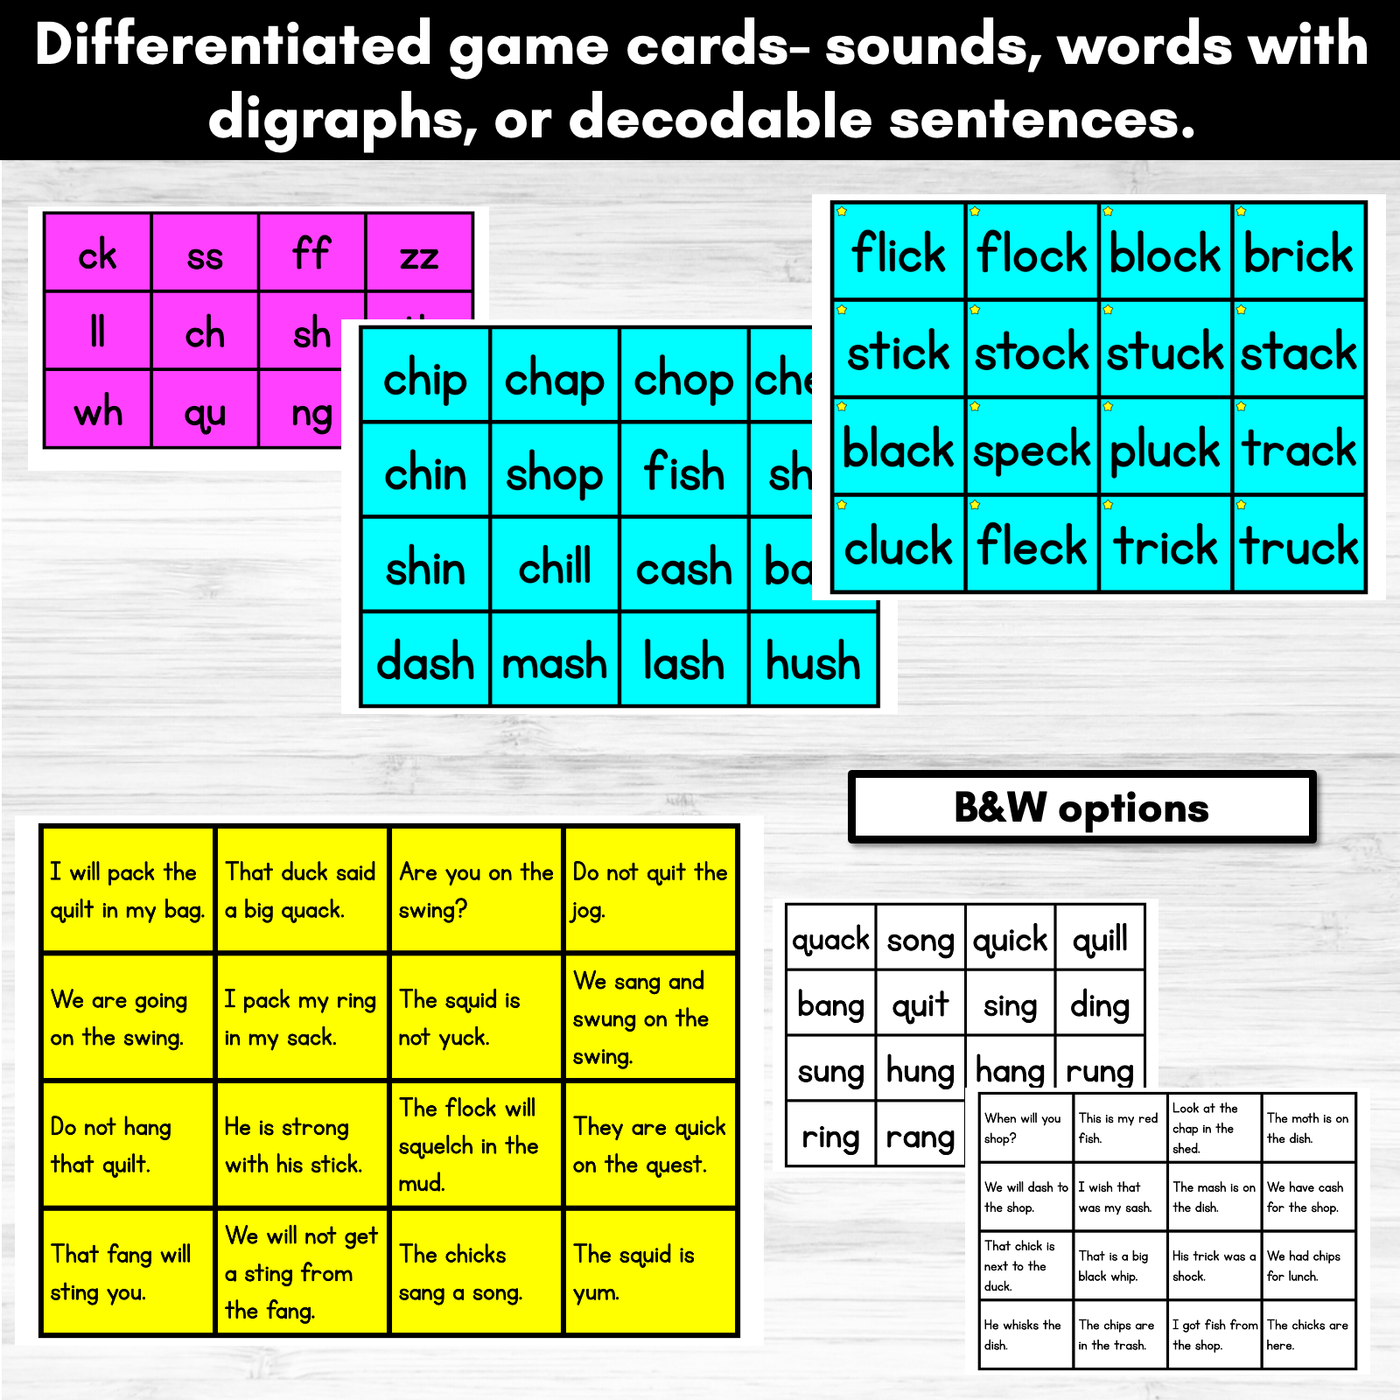 Digraphs Phonics Board Games - Digraphs, Decodable Words and Sentences